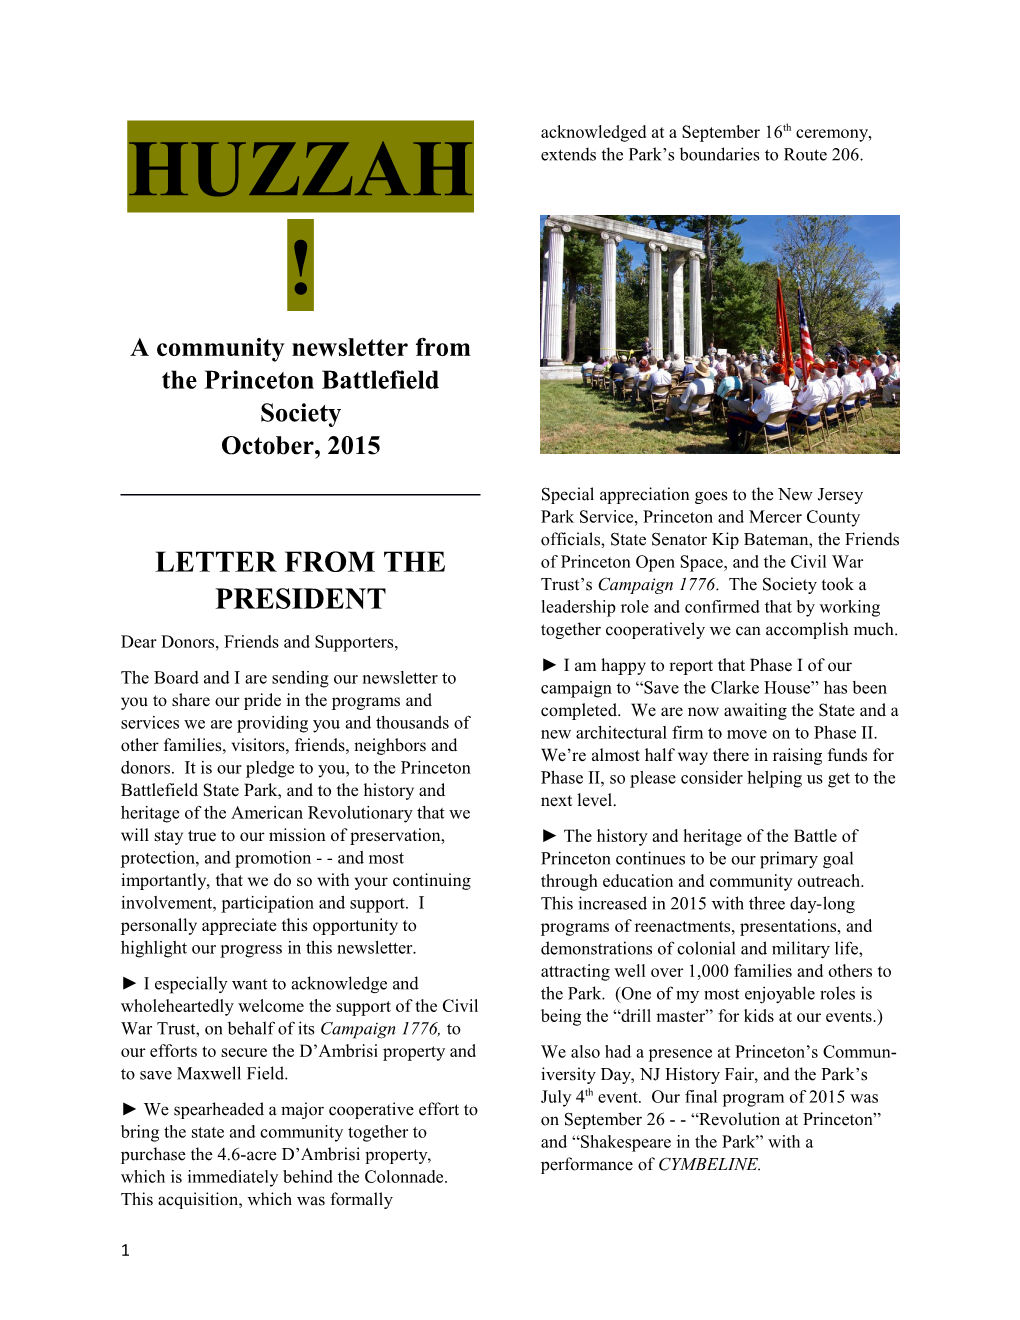 A Community Newsletter from the Princeton Battlefield Society